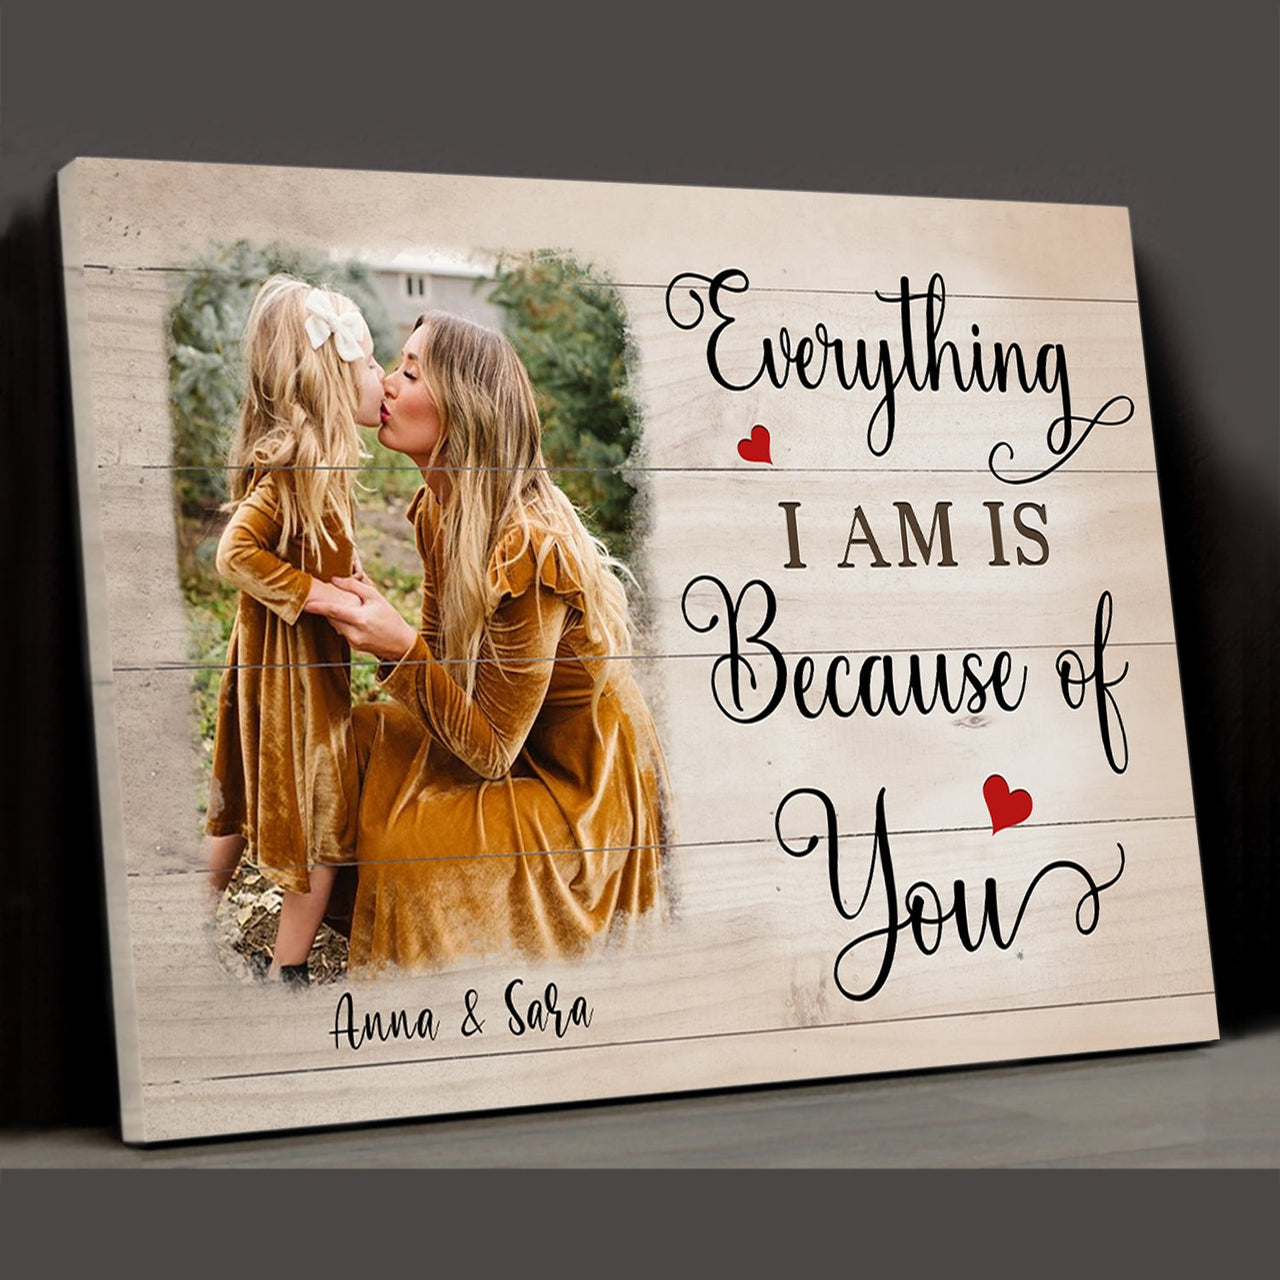 Customized Picture Mom and Daughter, Son Wall Art, We appreciate you Canvas for Mother